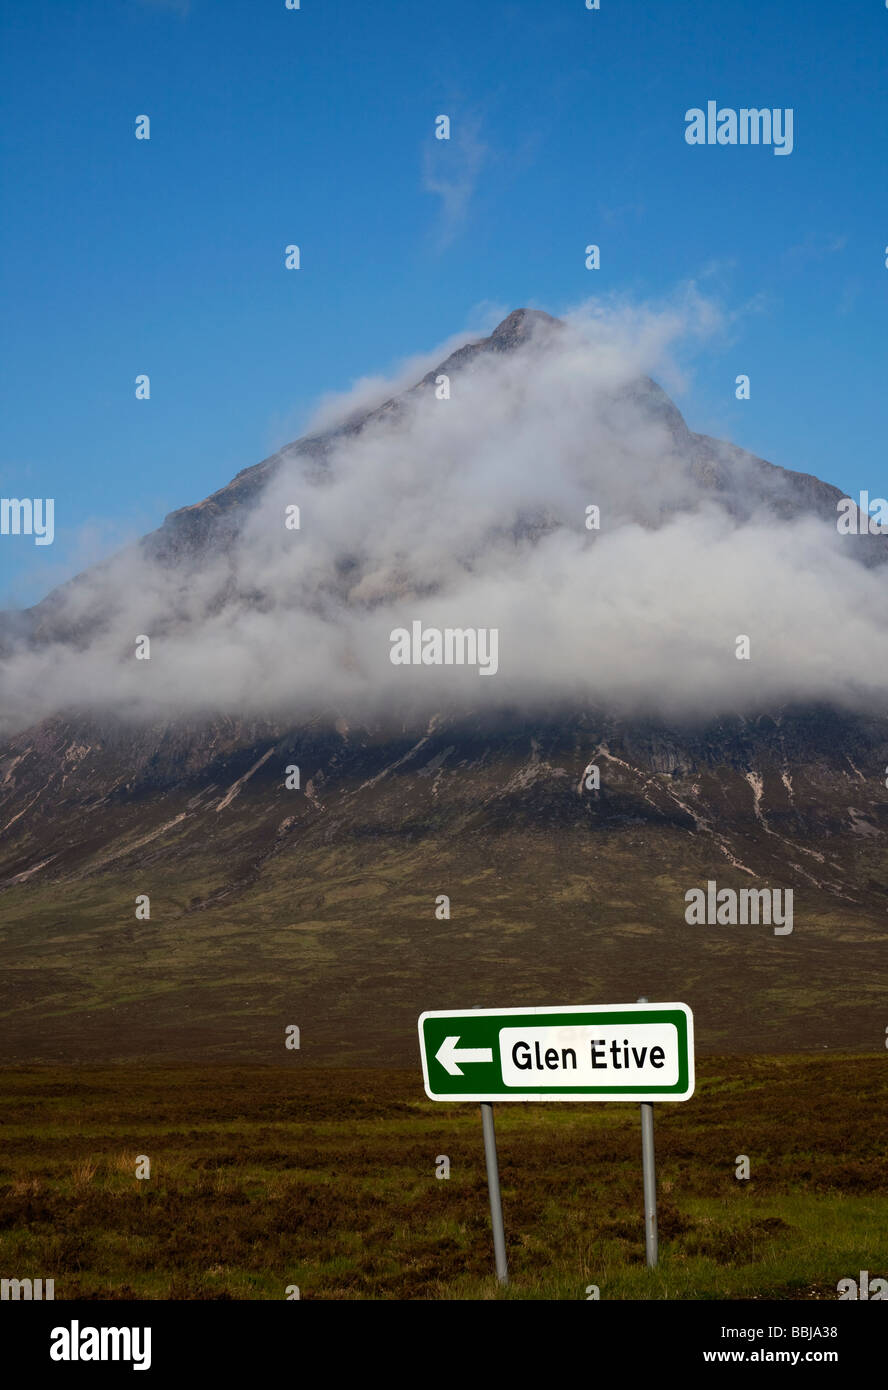 Buachaille Etive Mor mountain shrouded in mist with Glen Etive signpost in foreground, Scotland, UK, Europe Stock Photo